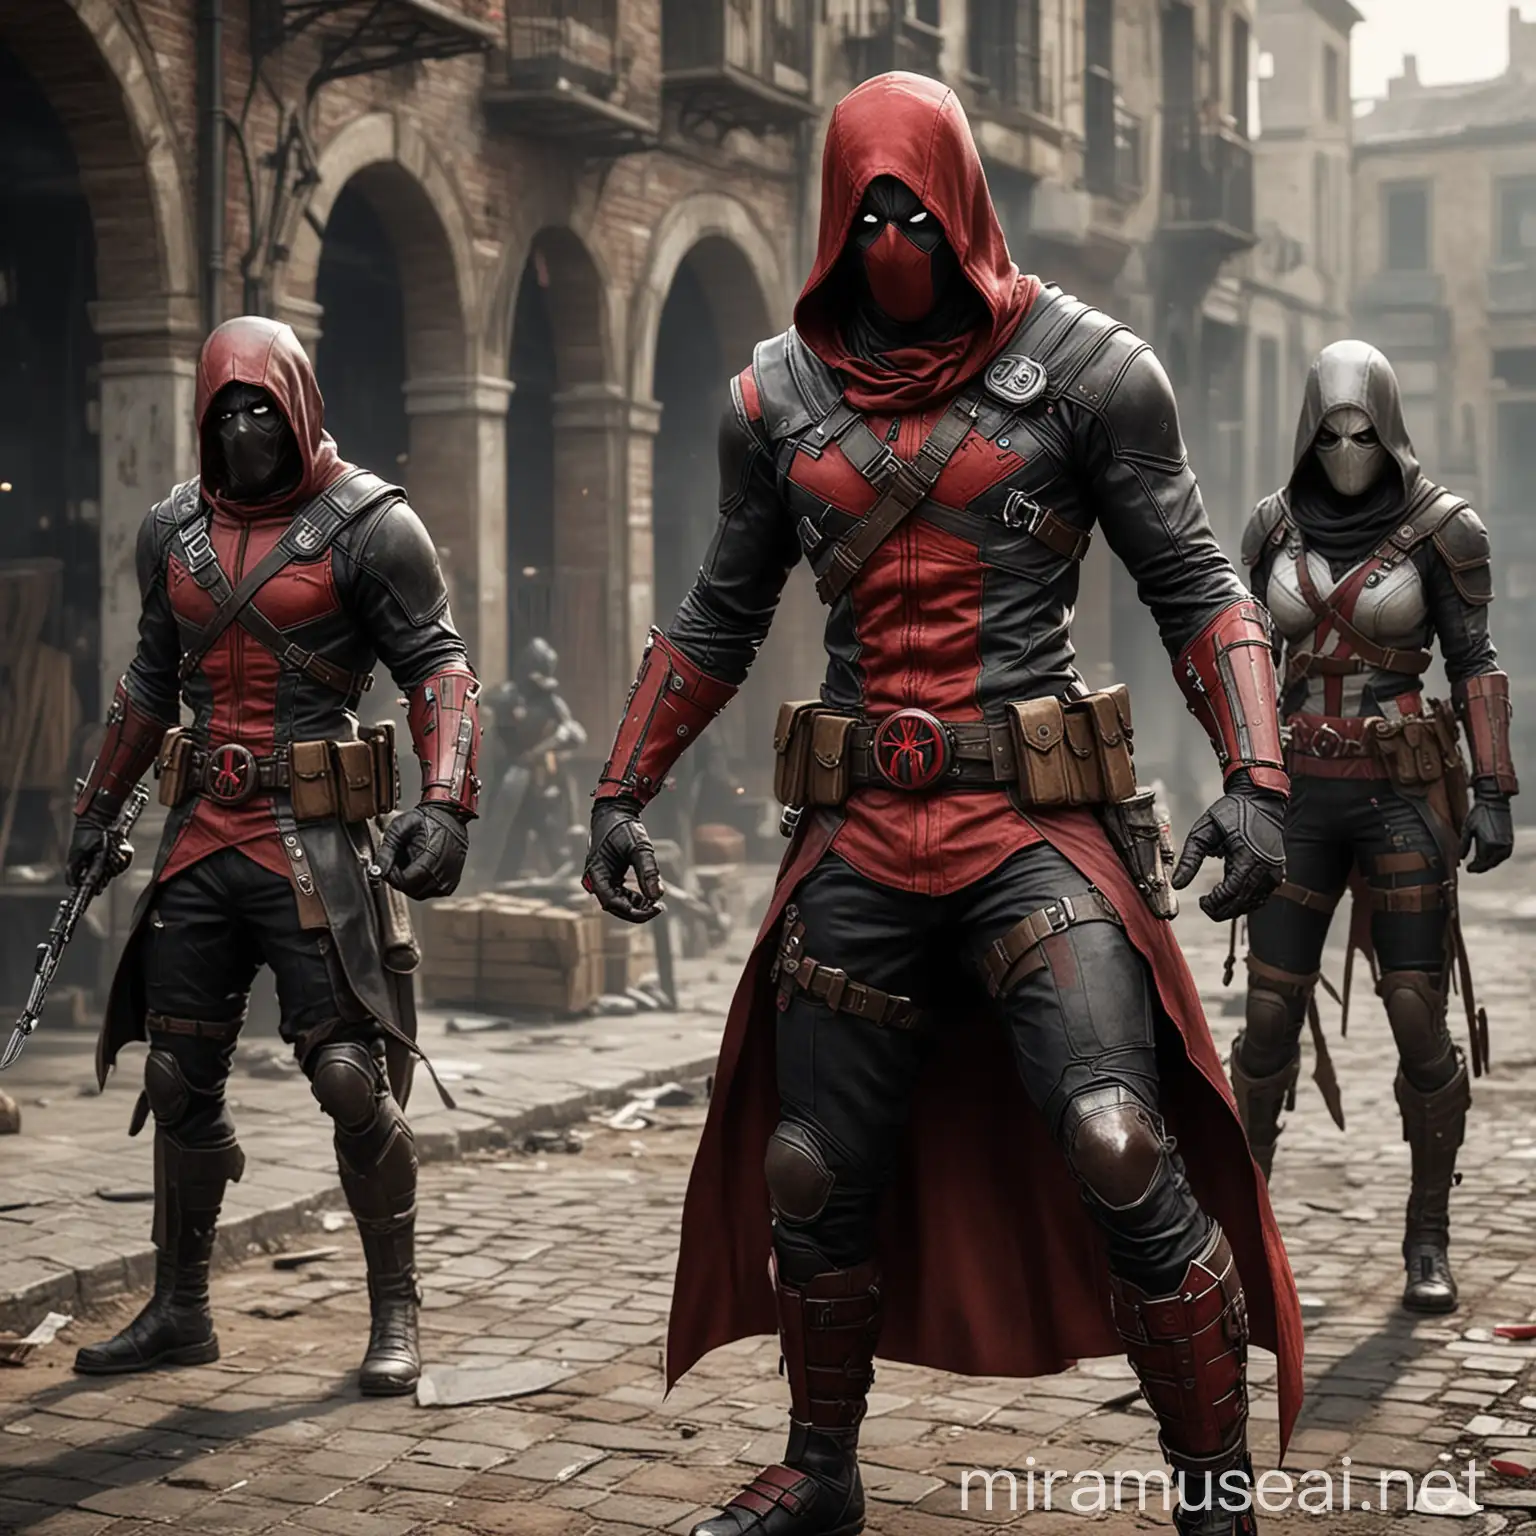 Stealthy Assassins Creed Deadpool Hybrid in Urban Historical Showdown with Avengers